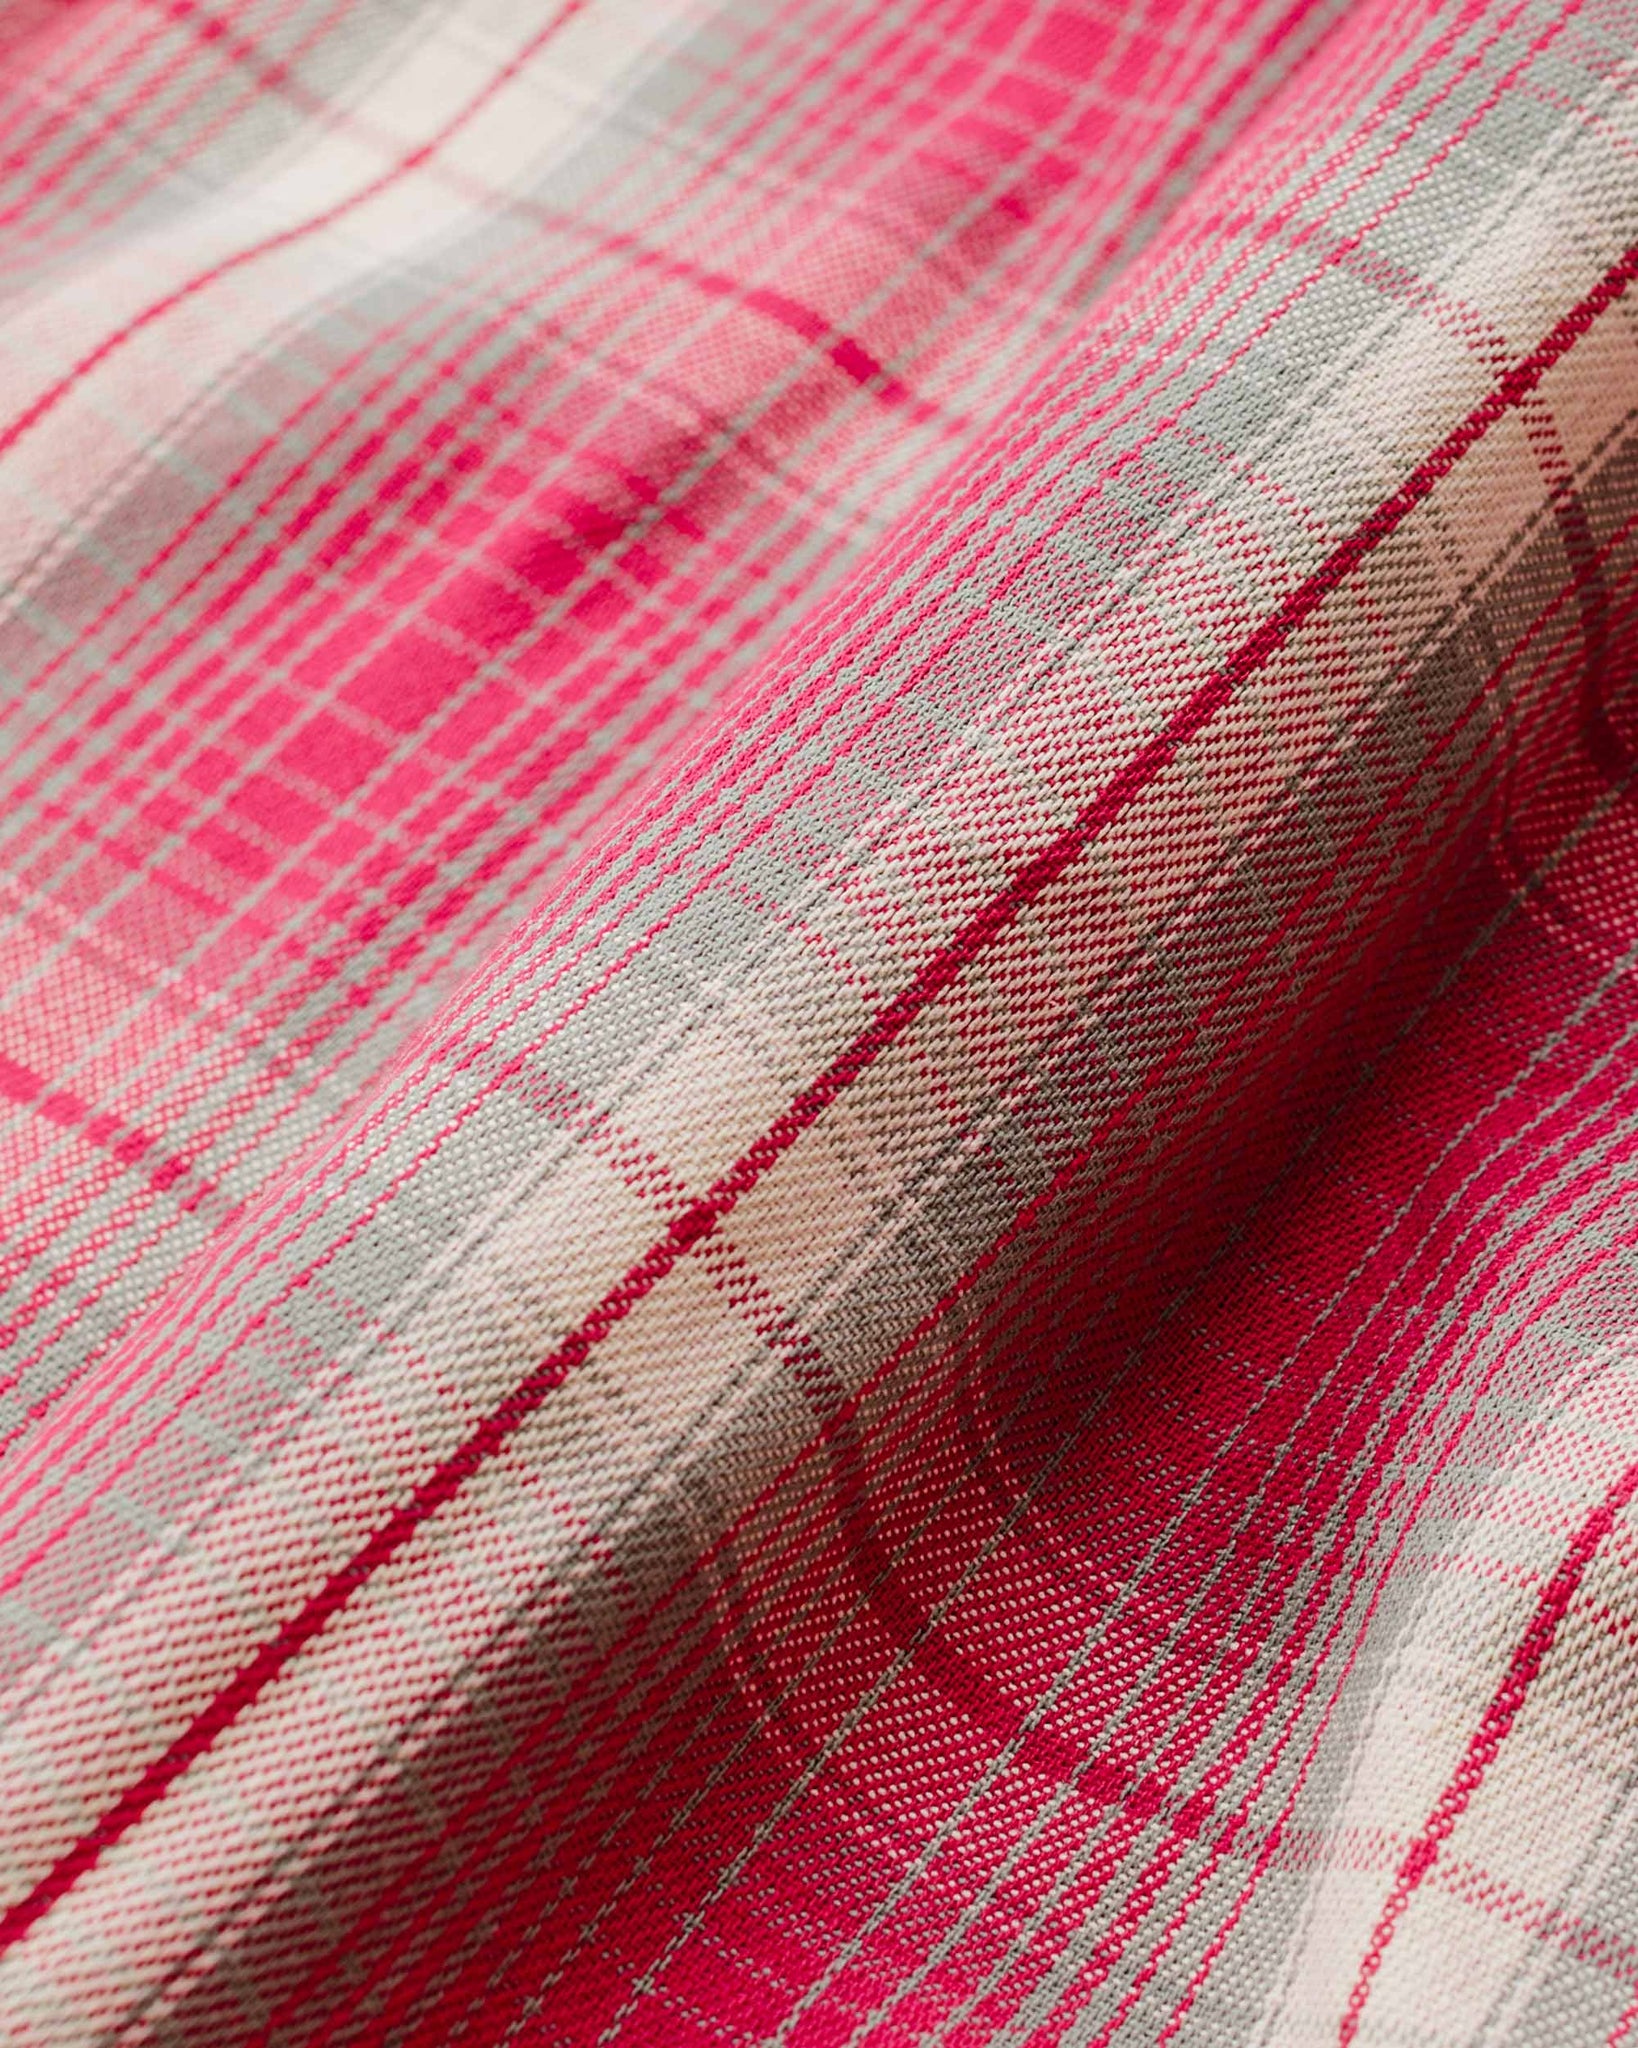 The Real McCoy's MS23008 8HU Ombre Check Summer Flannel Shirt Pink Fabric